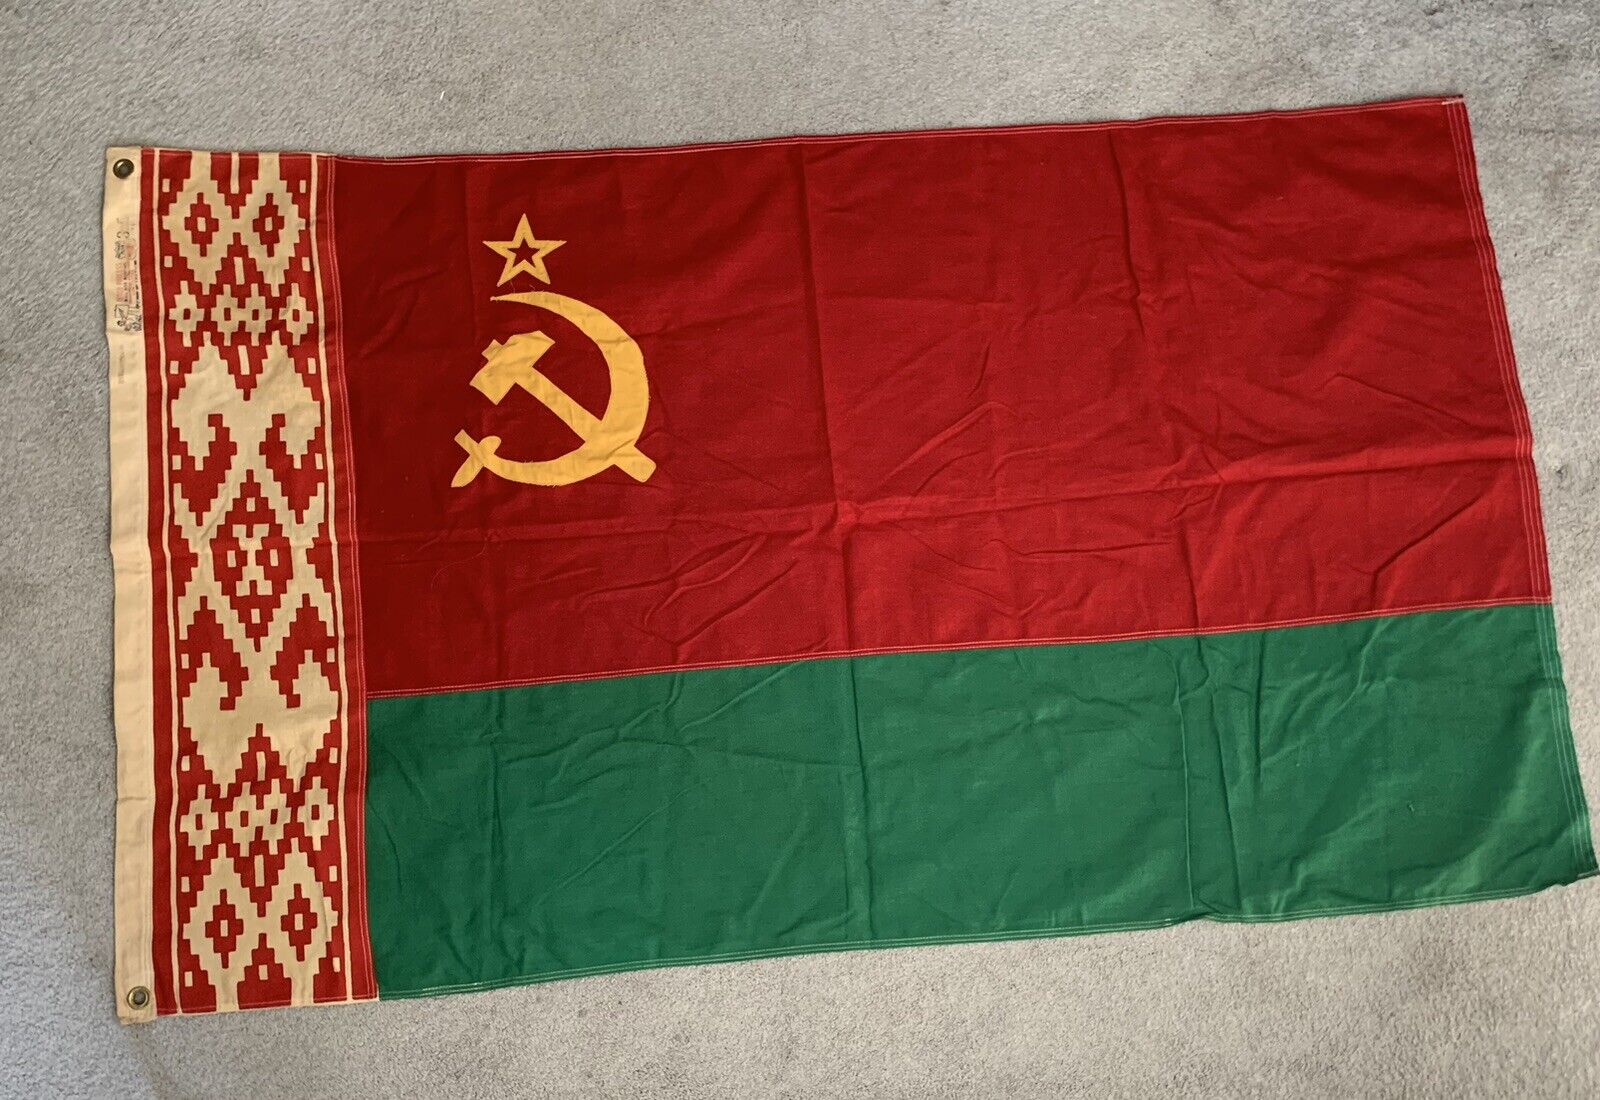 BYELORUSSIAN Dettras Brand FLAG 3' x 5' Double Sided Woven 100 % Cotton Vintage